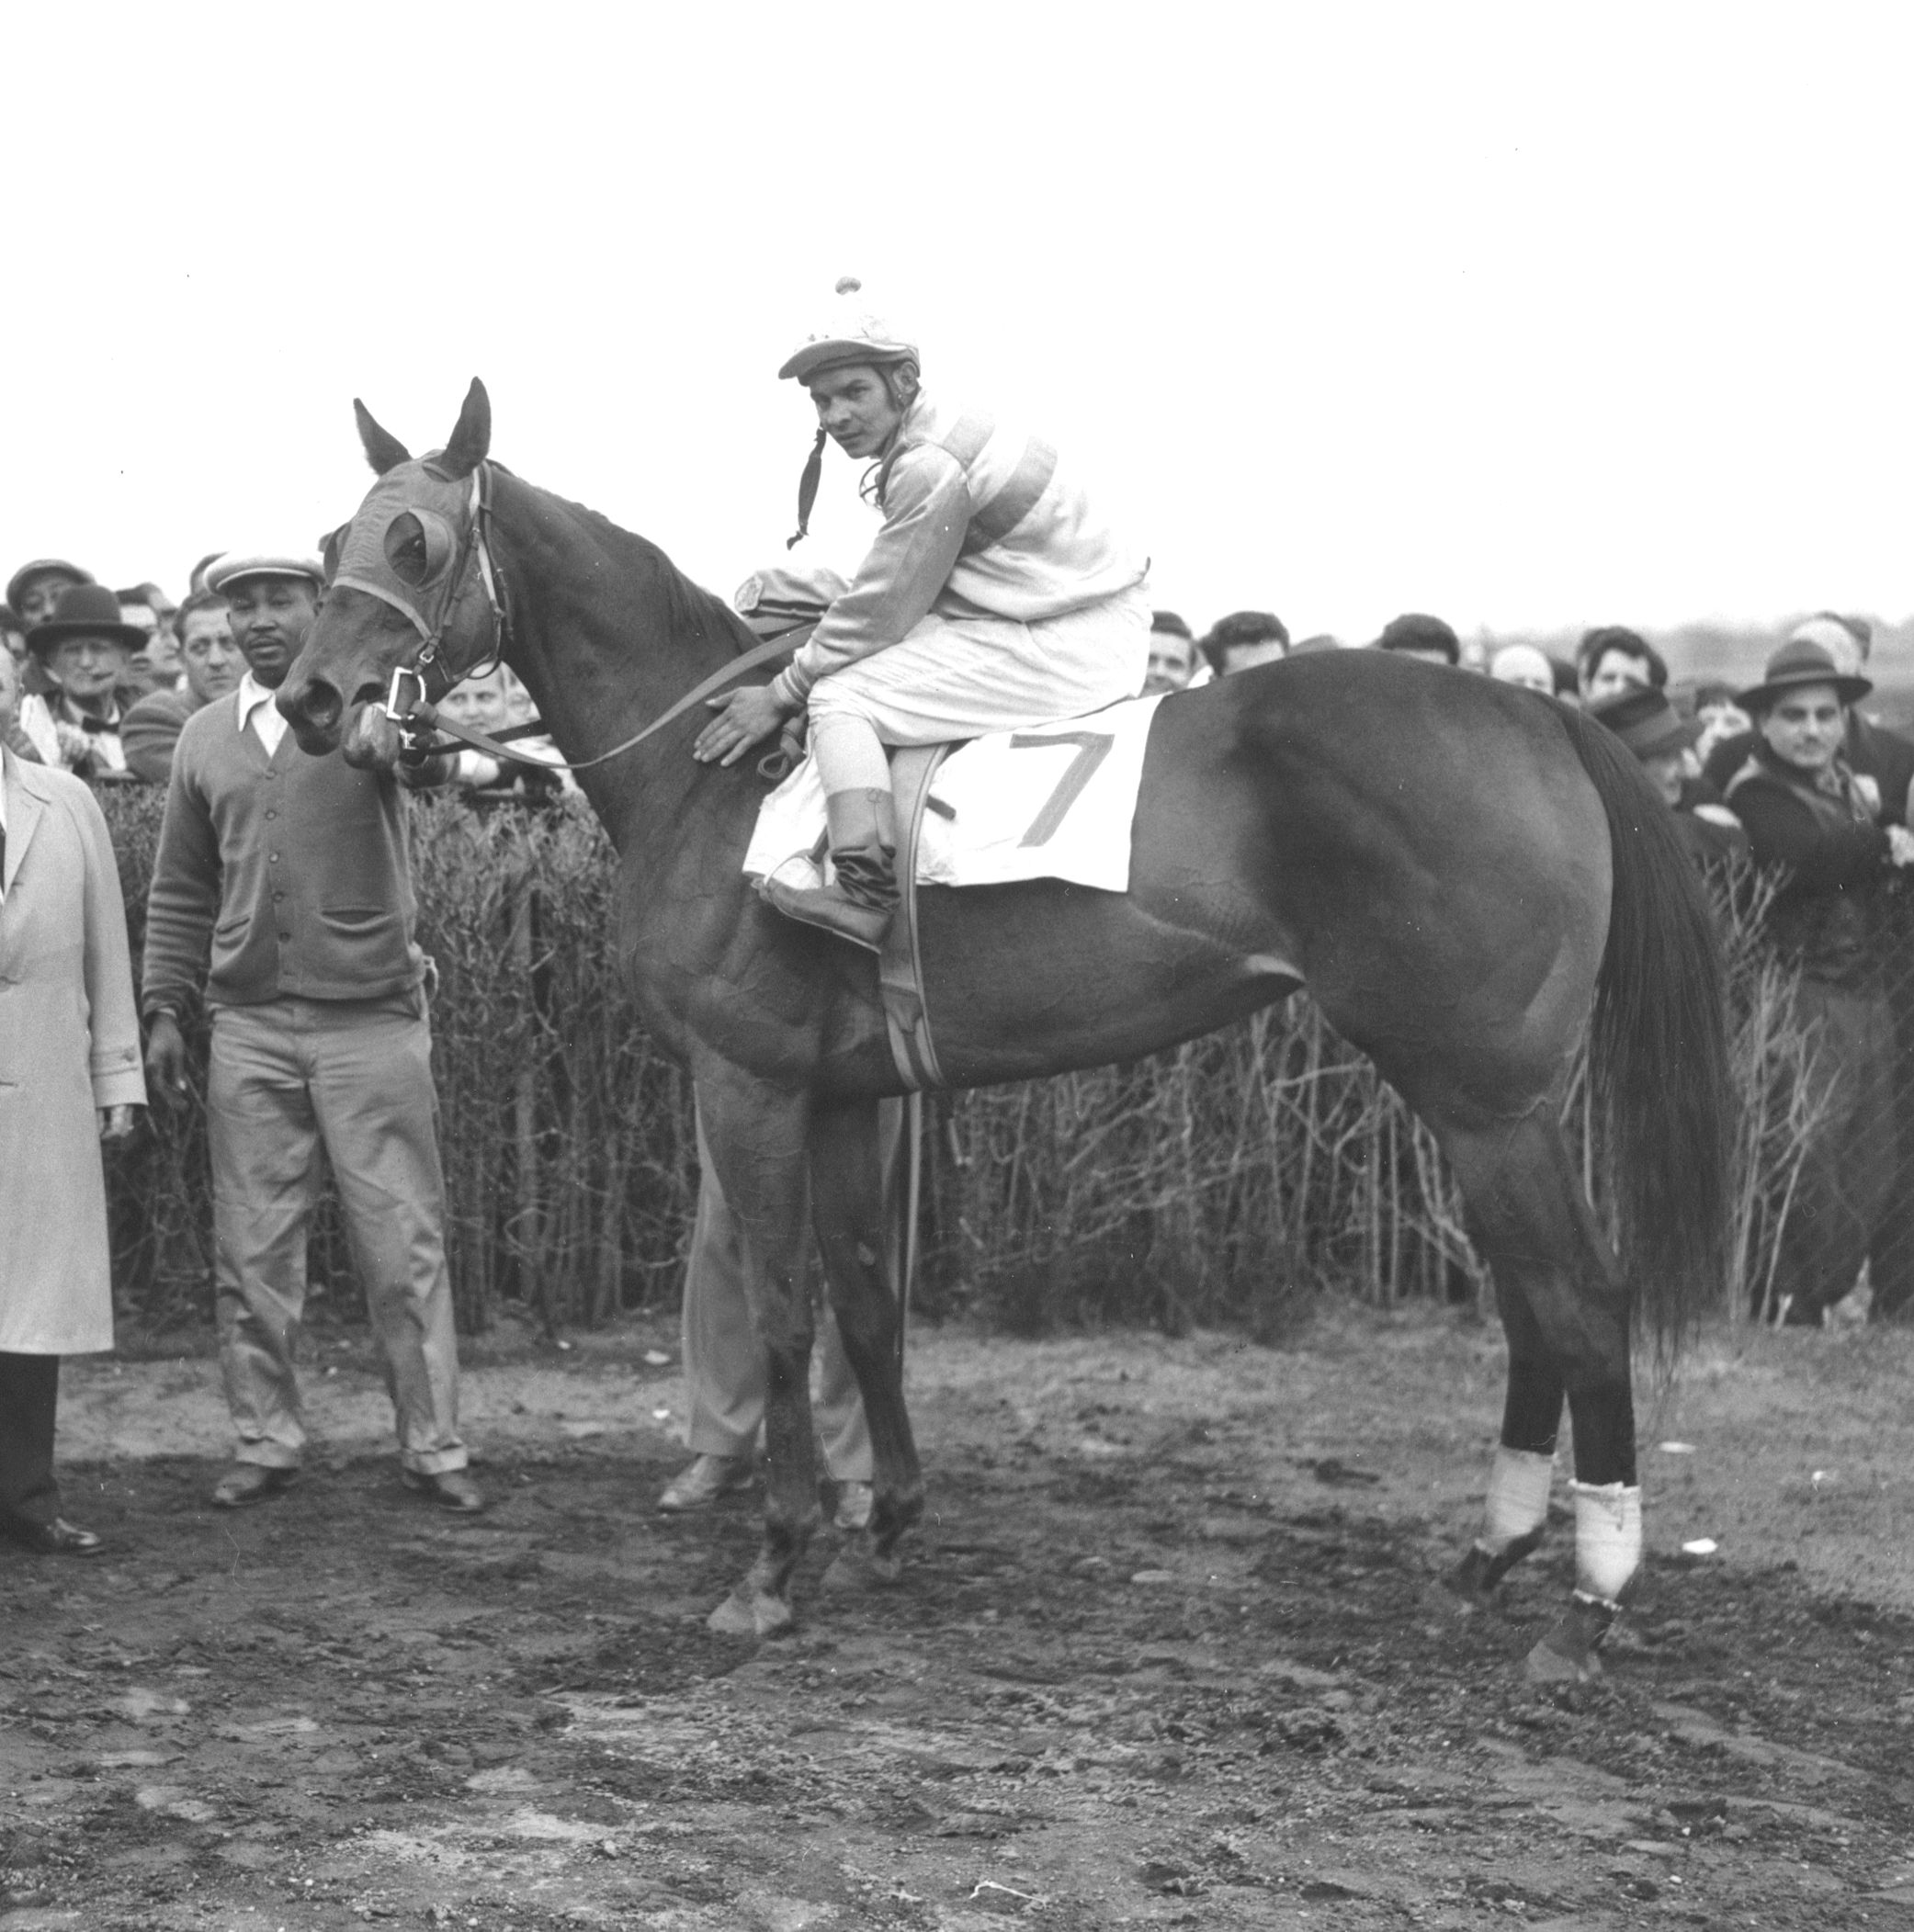 Searching in the winner's circle with Ismael Valenzuela up (Bert Morgan/Museum Collection)